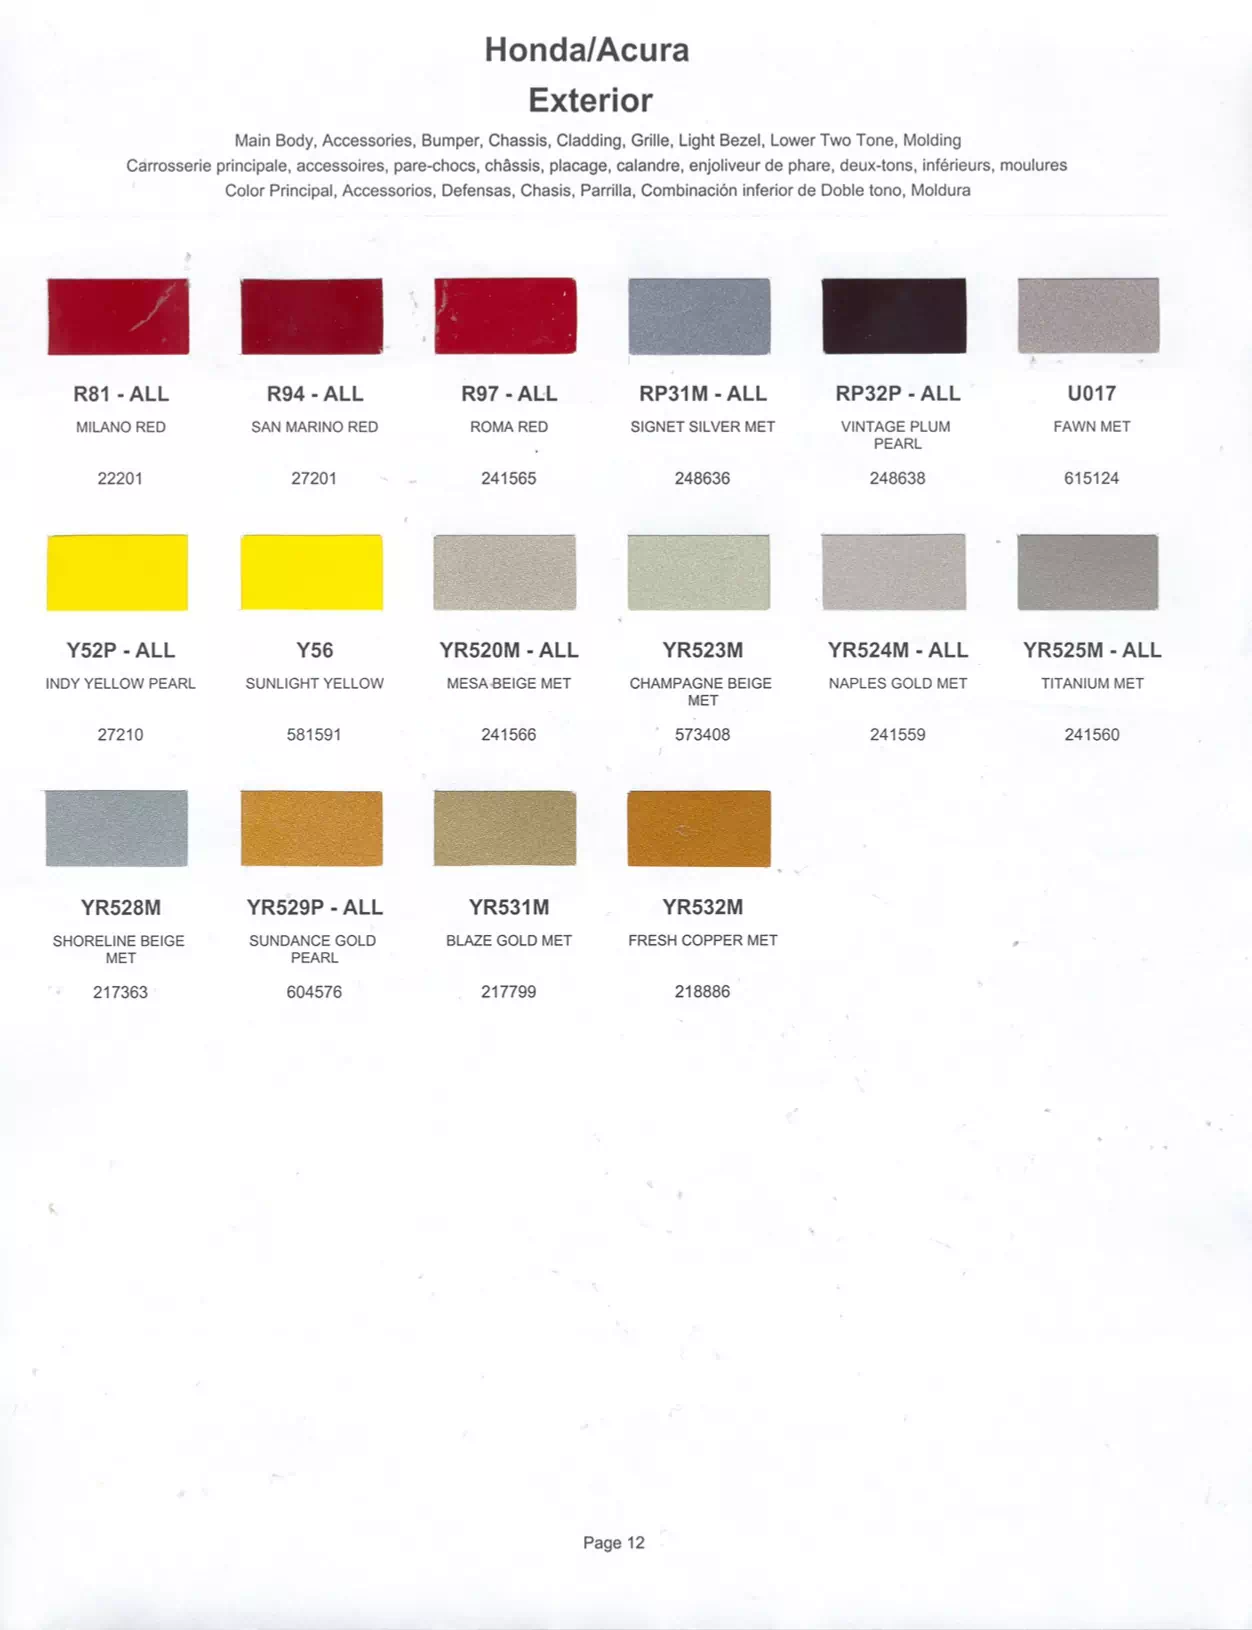 Exterior paint chips and their ordering codes for Honda and Acura Vehicles